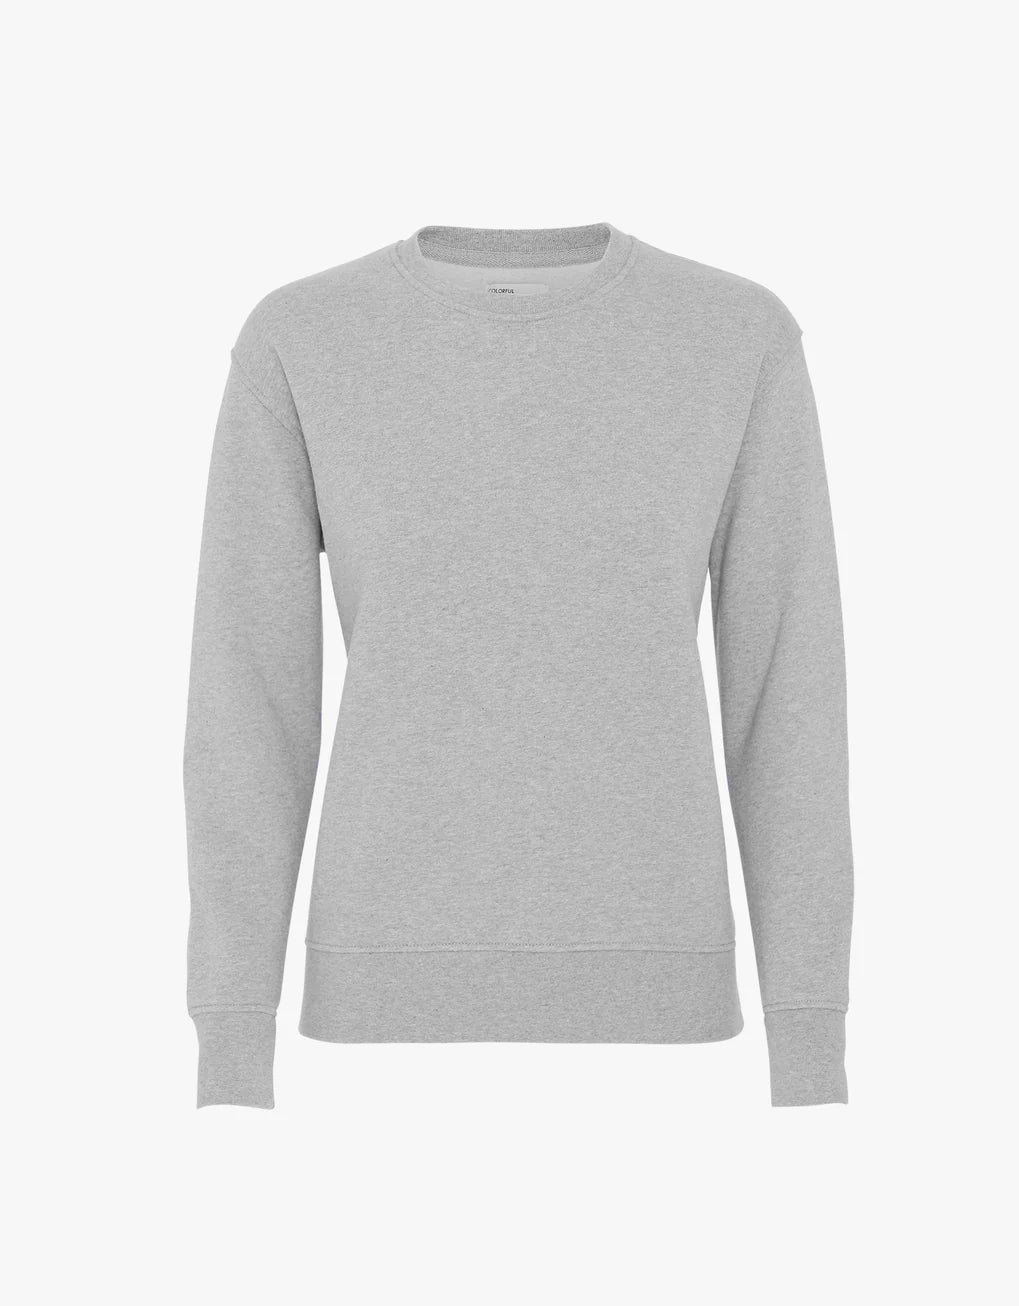 A Colorful Standard Classic Organic Crew women's grey sweatshirt made from organic cotton, machine washable and showcased on a white background.